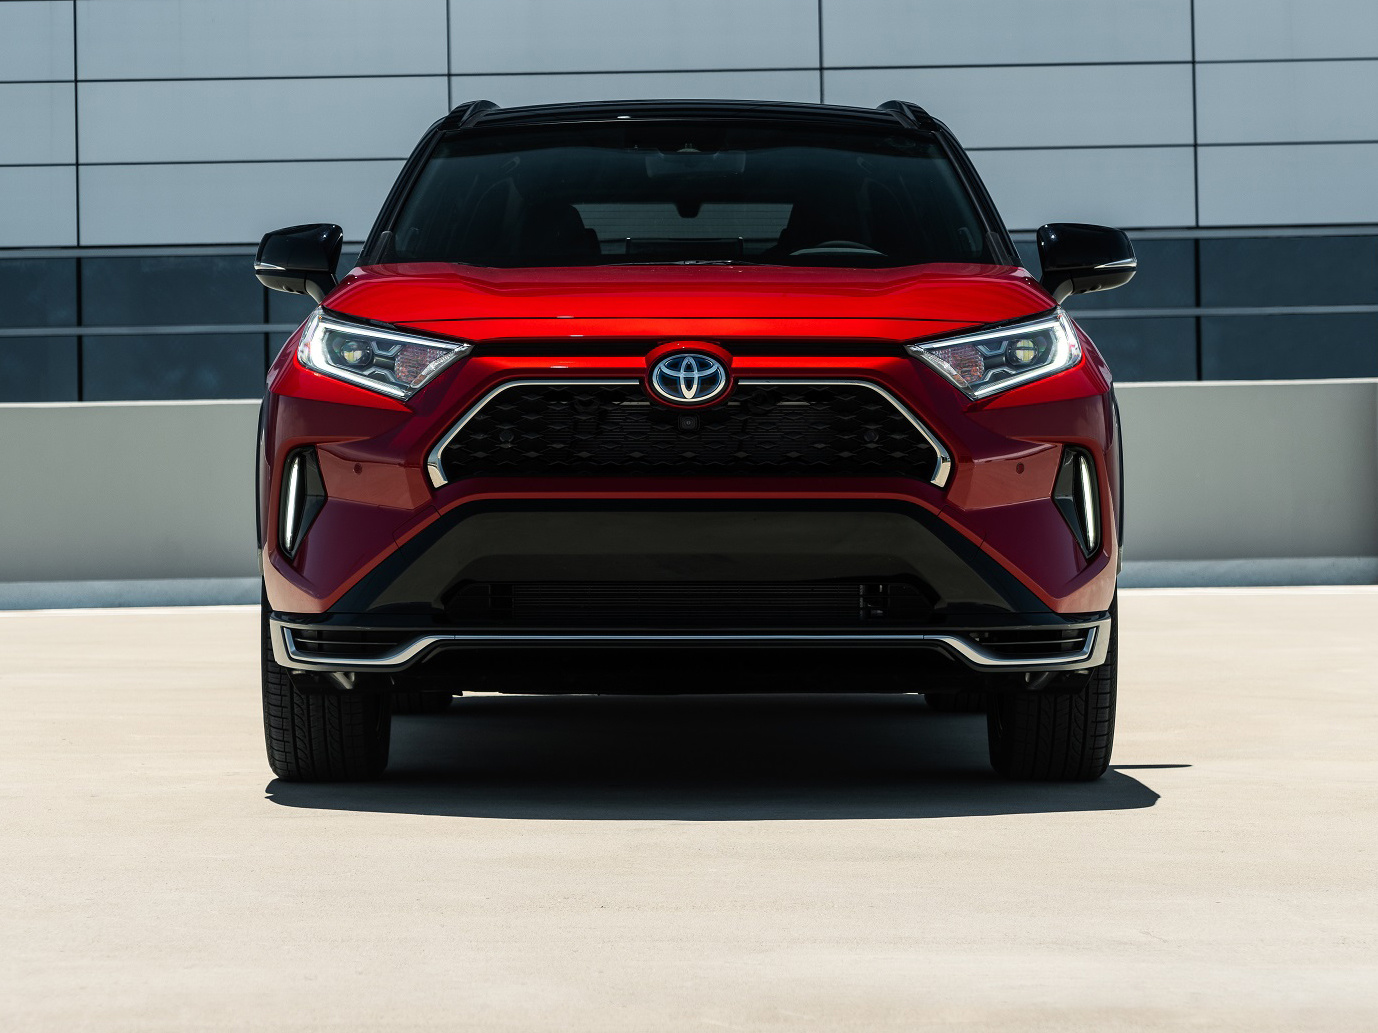 The Toyota RAV4 Prime doesn't best its chief rival in every category.